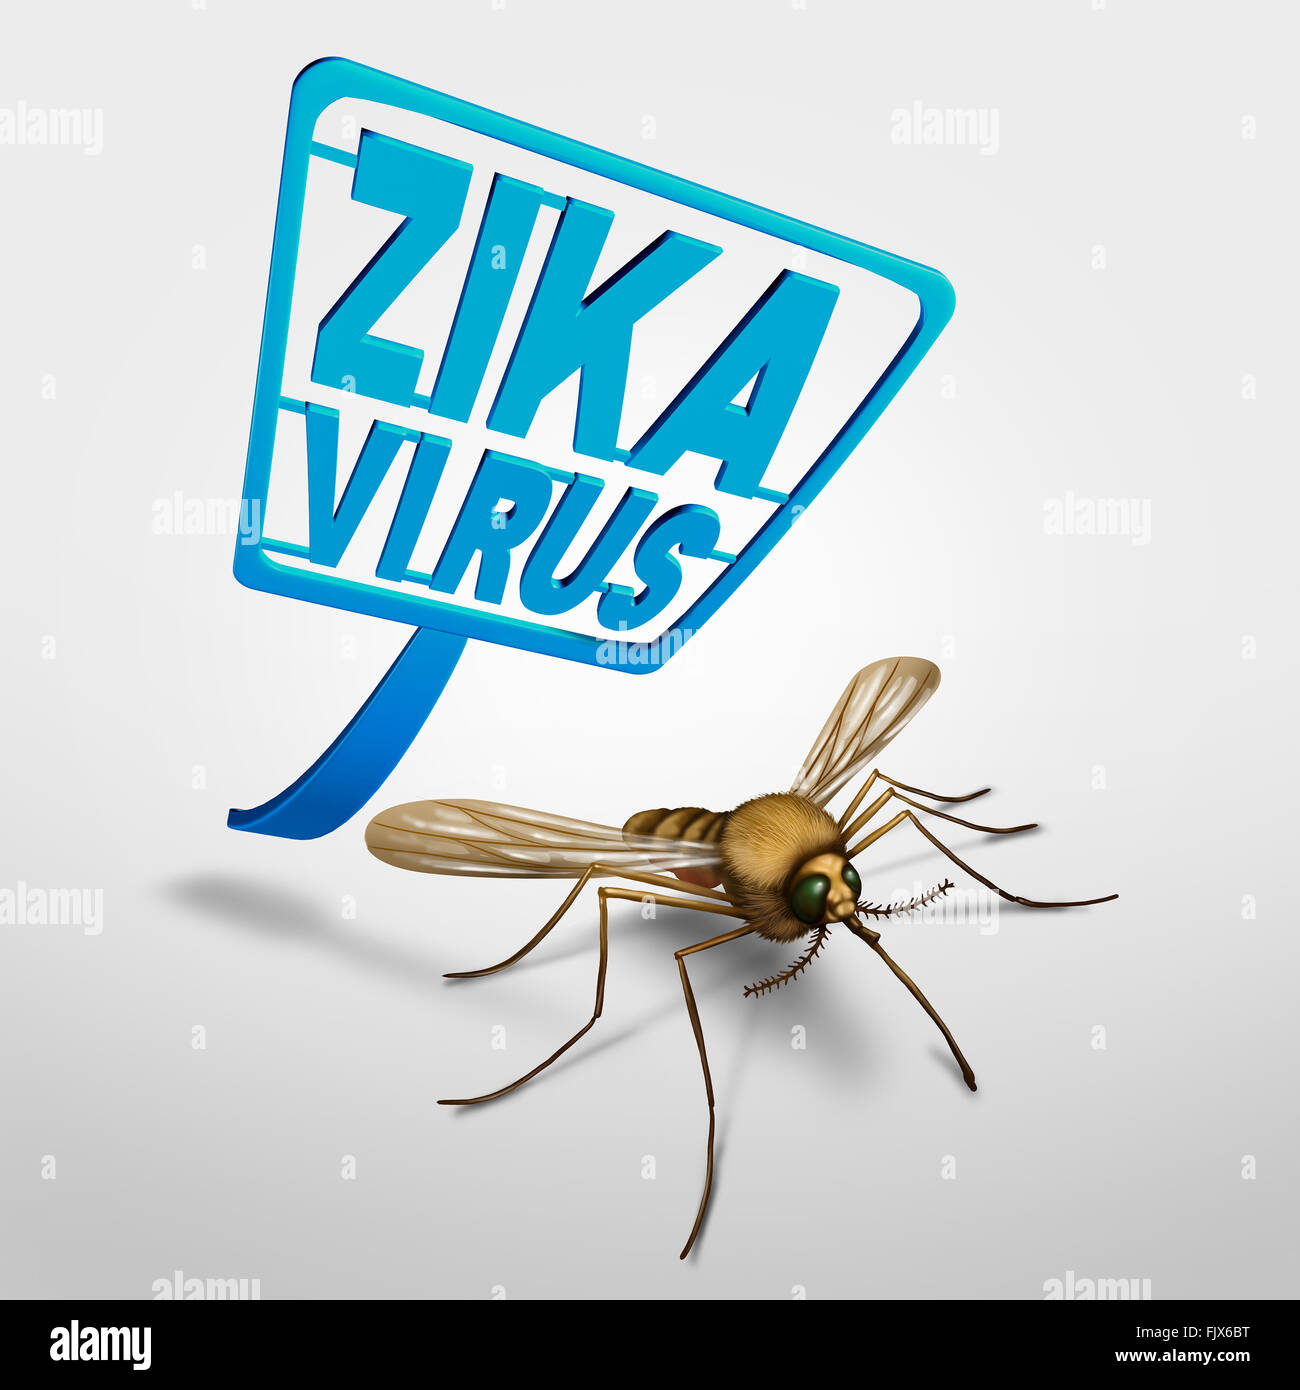 Zika virus control and risk symbol as a fly swatter attacking an infected disease carrying mosquitto that represents the health Stock Photo